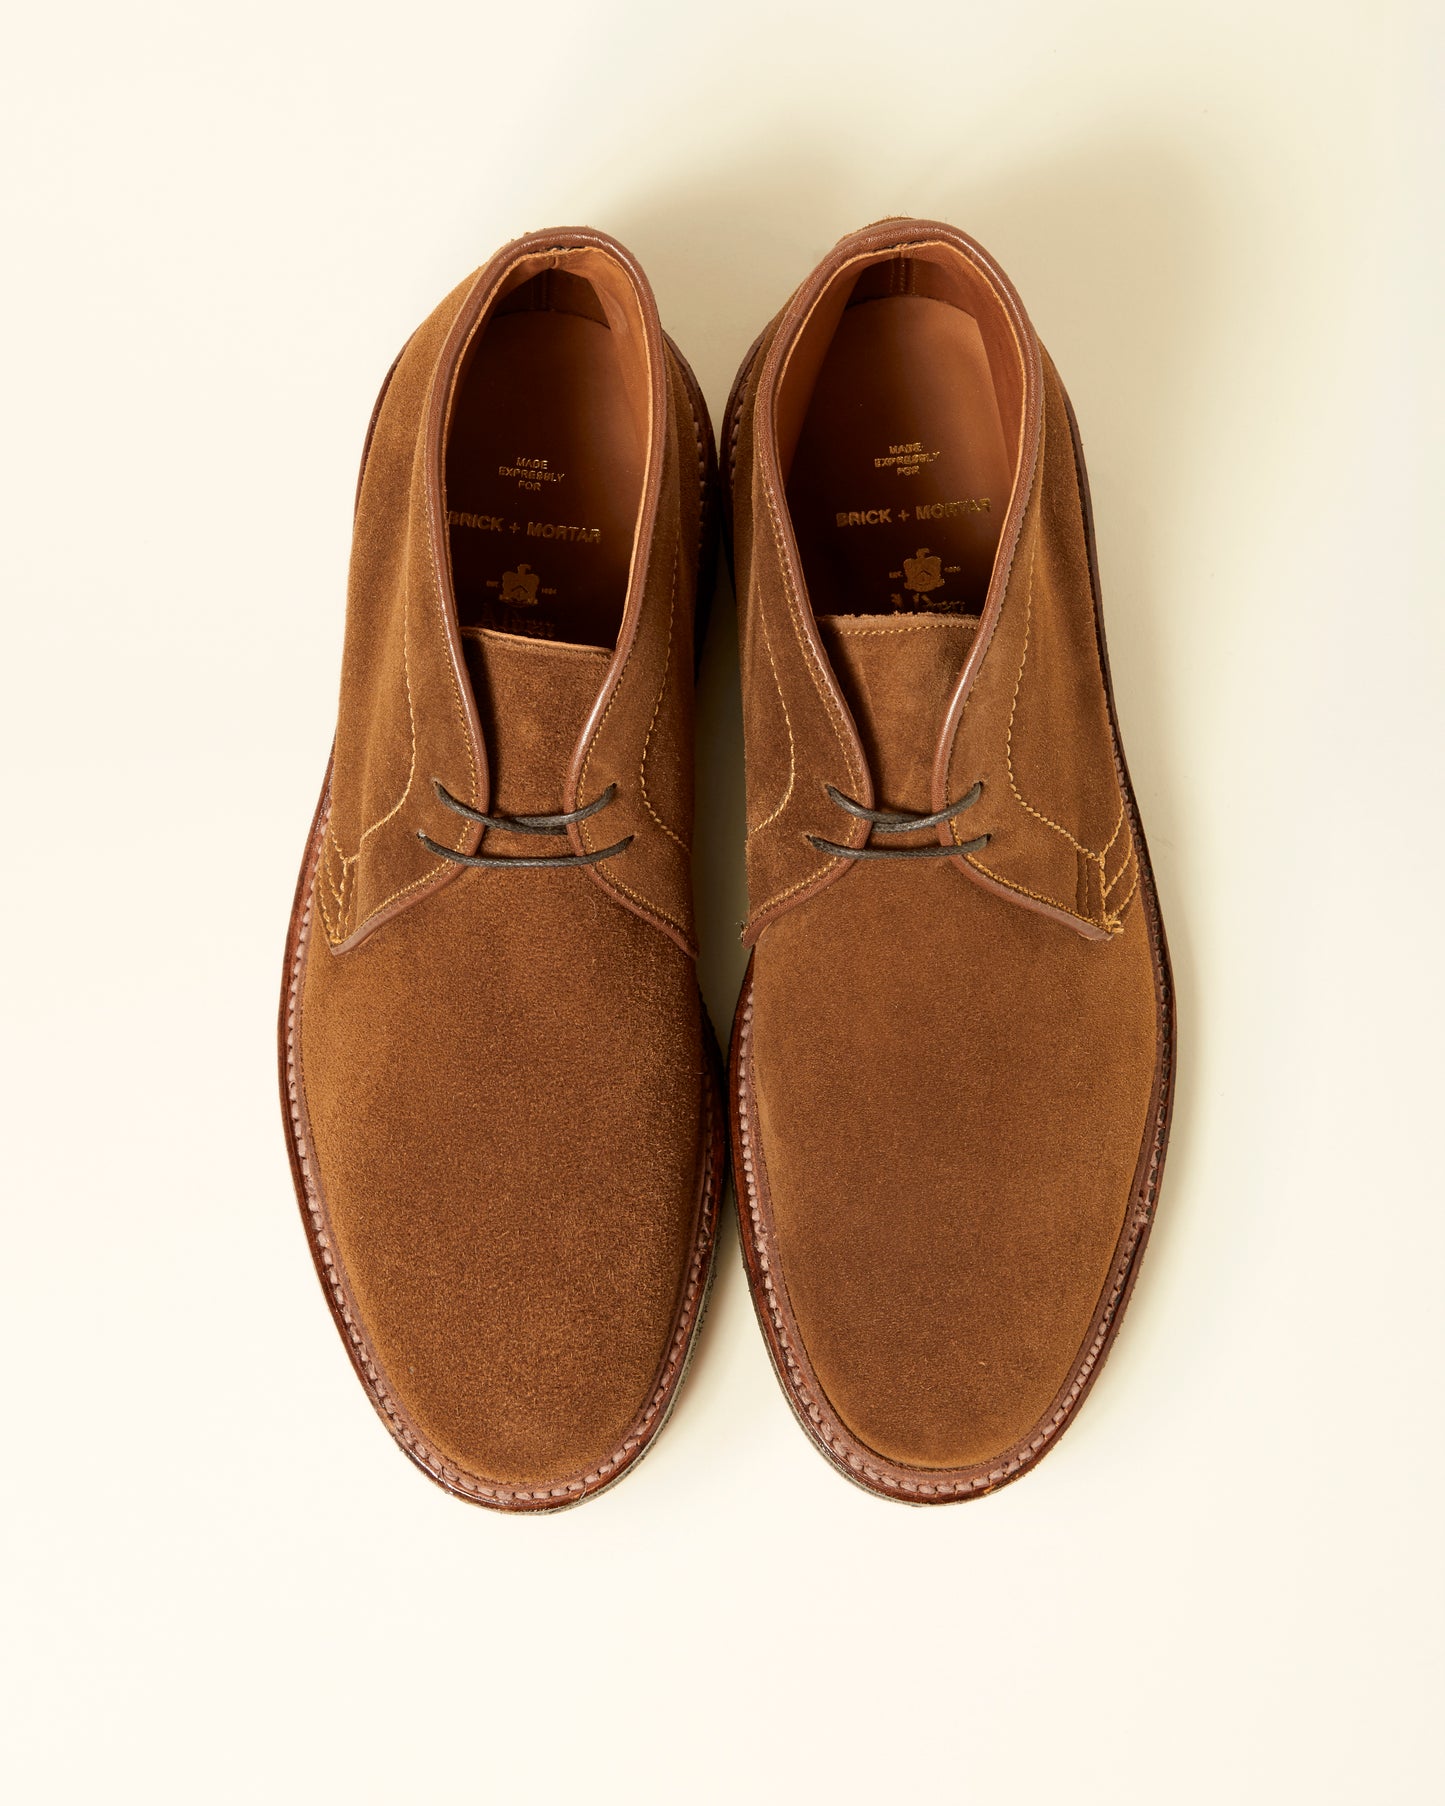 "Everyday" Chukka Boot in Snuff Suede, Barrie Last